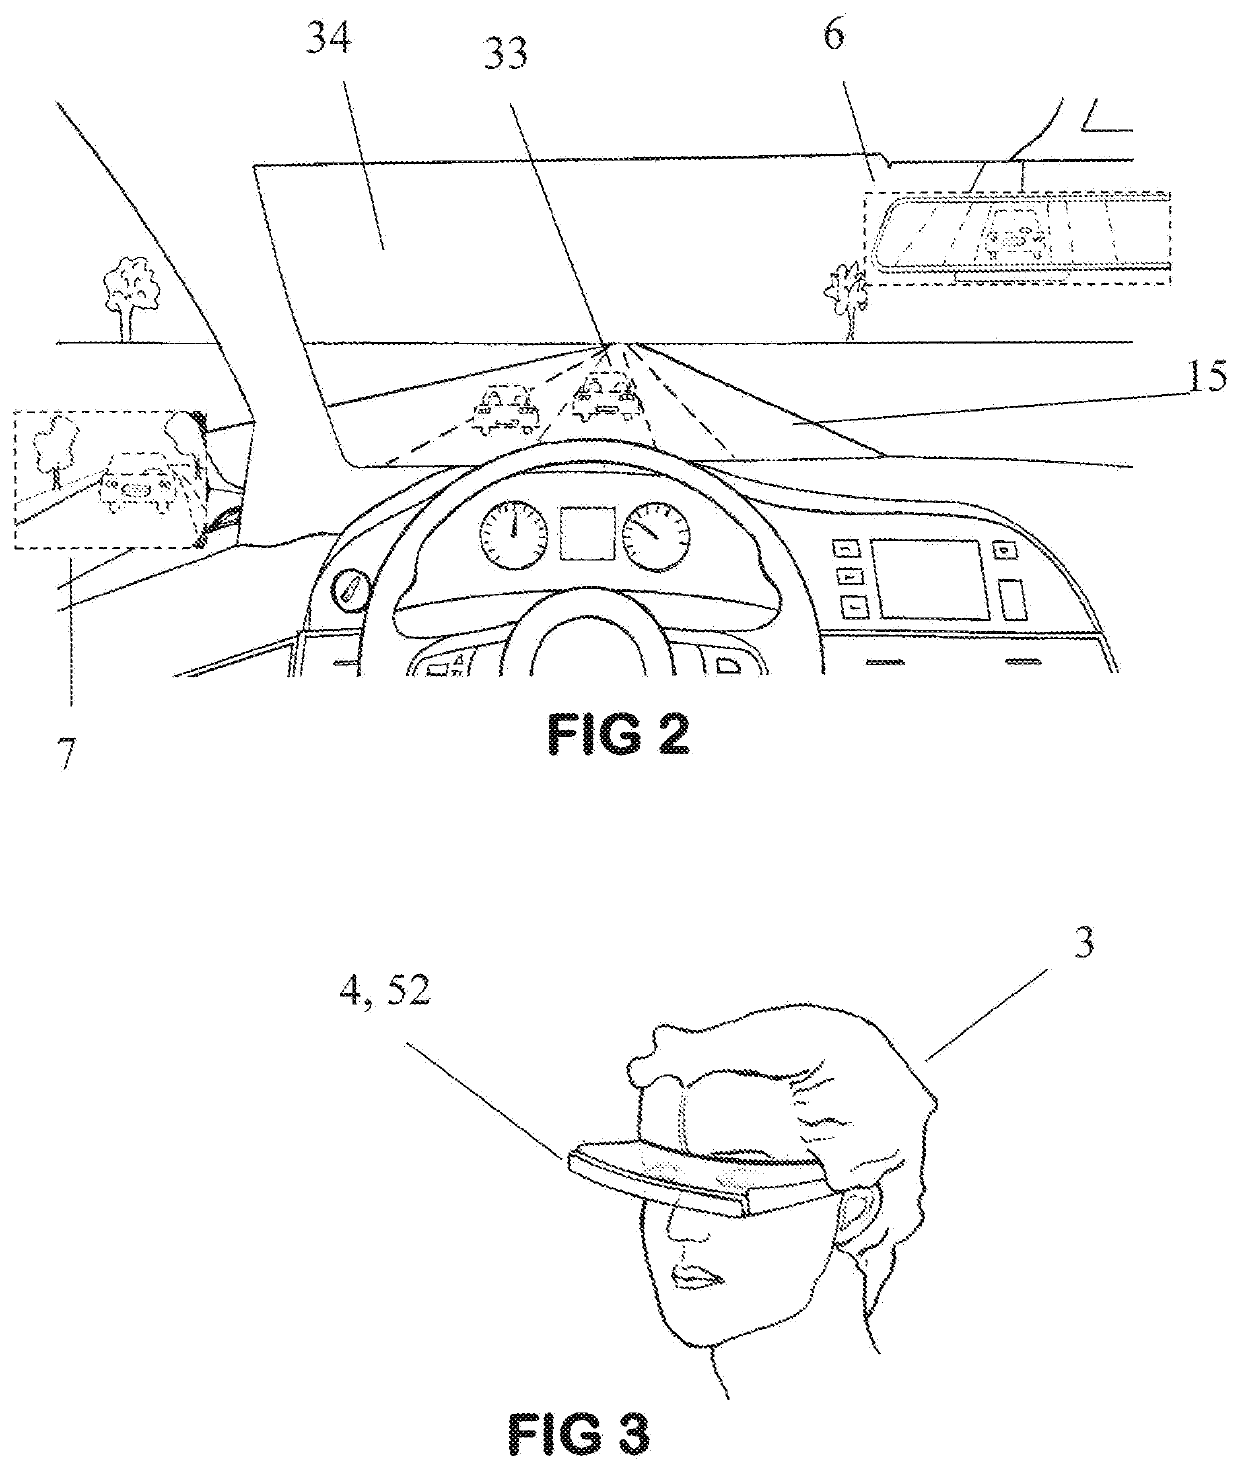 Driver education system and method for training in simulated road emergencies